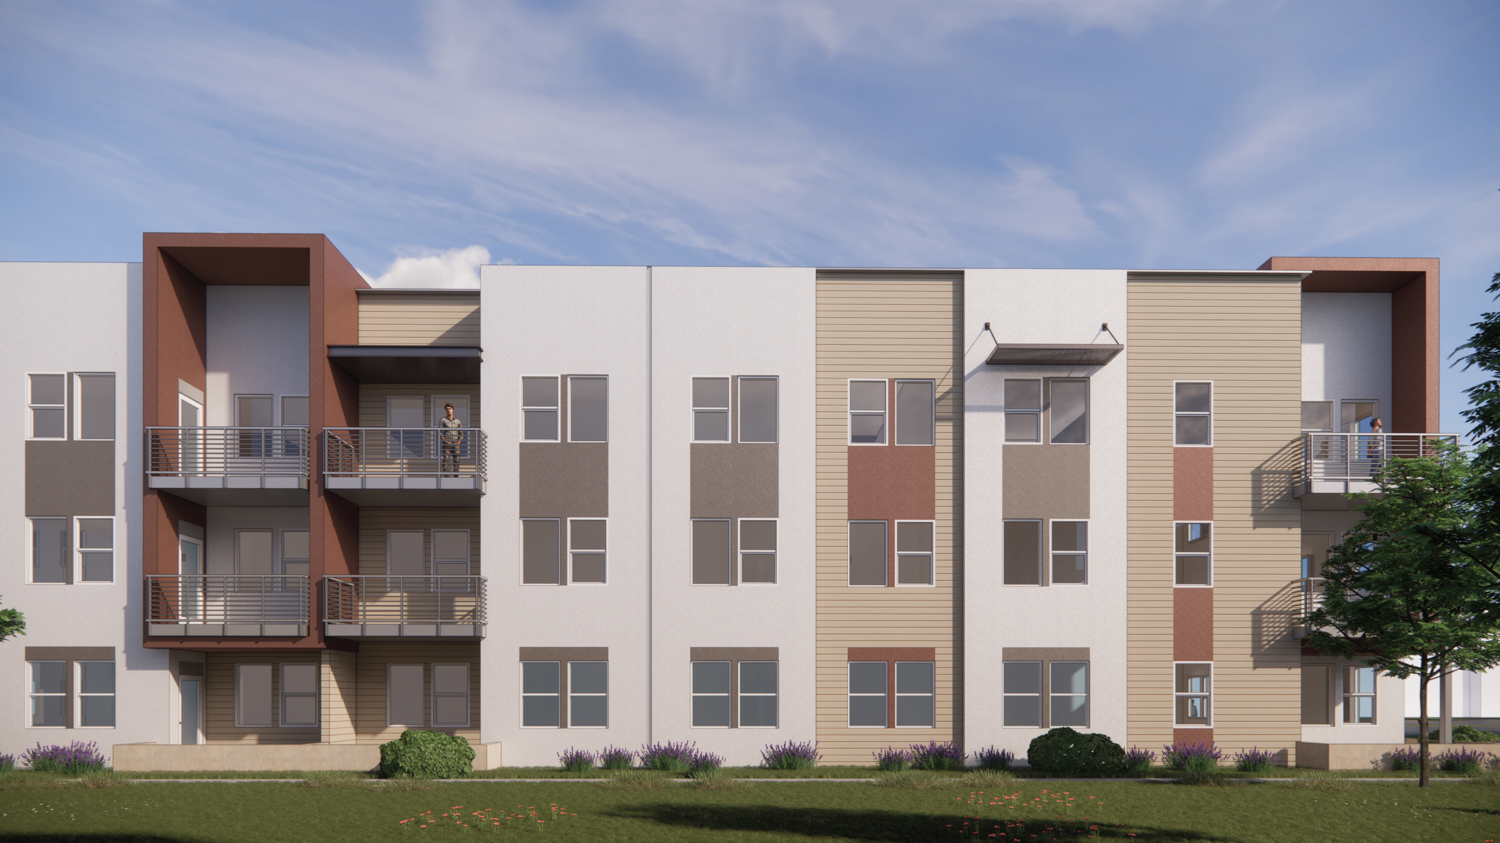 Bruceville Road Apartments at 7400 Shasta Avenue townhome elevation, rendering by LPAS Architecture + Design